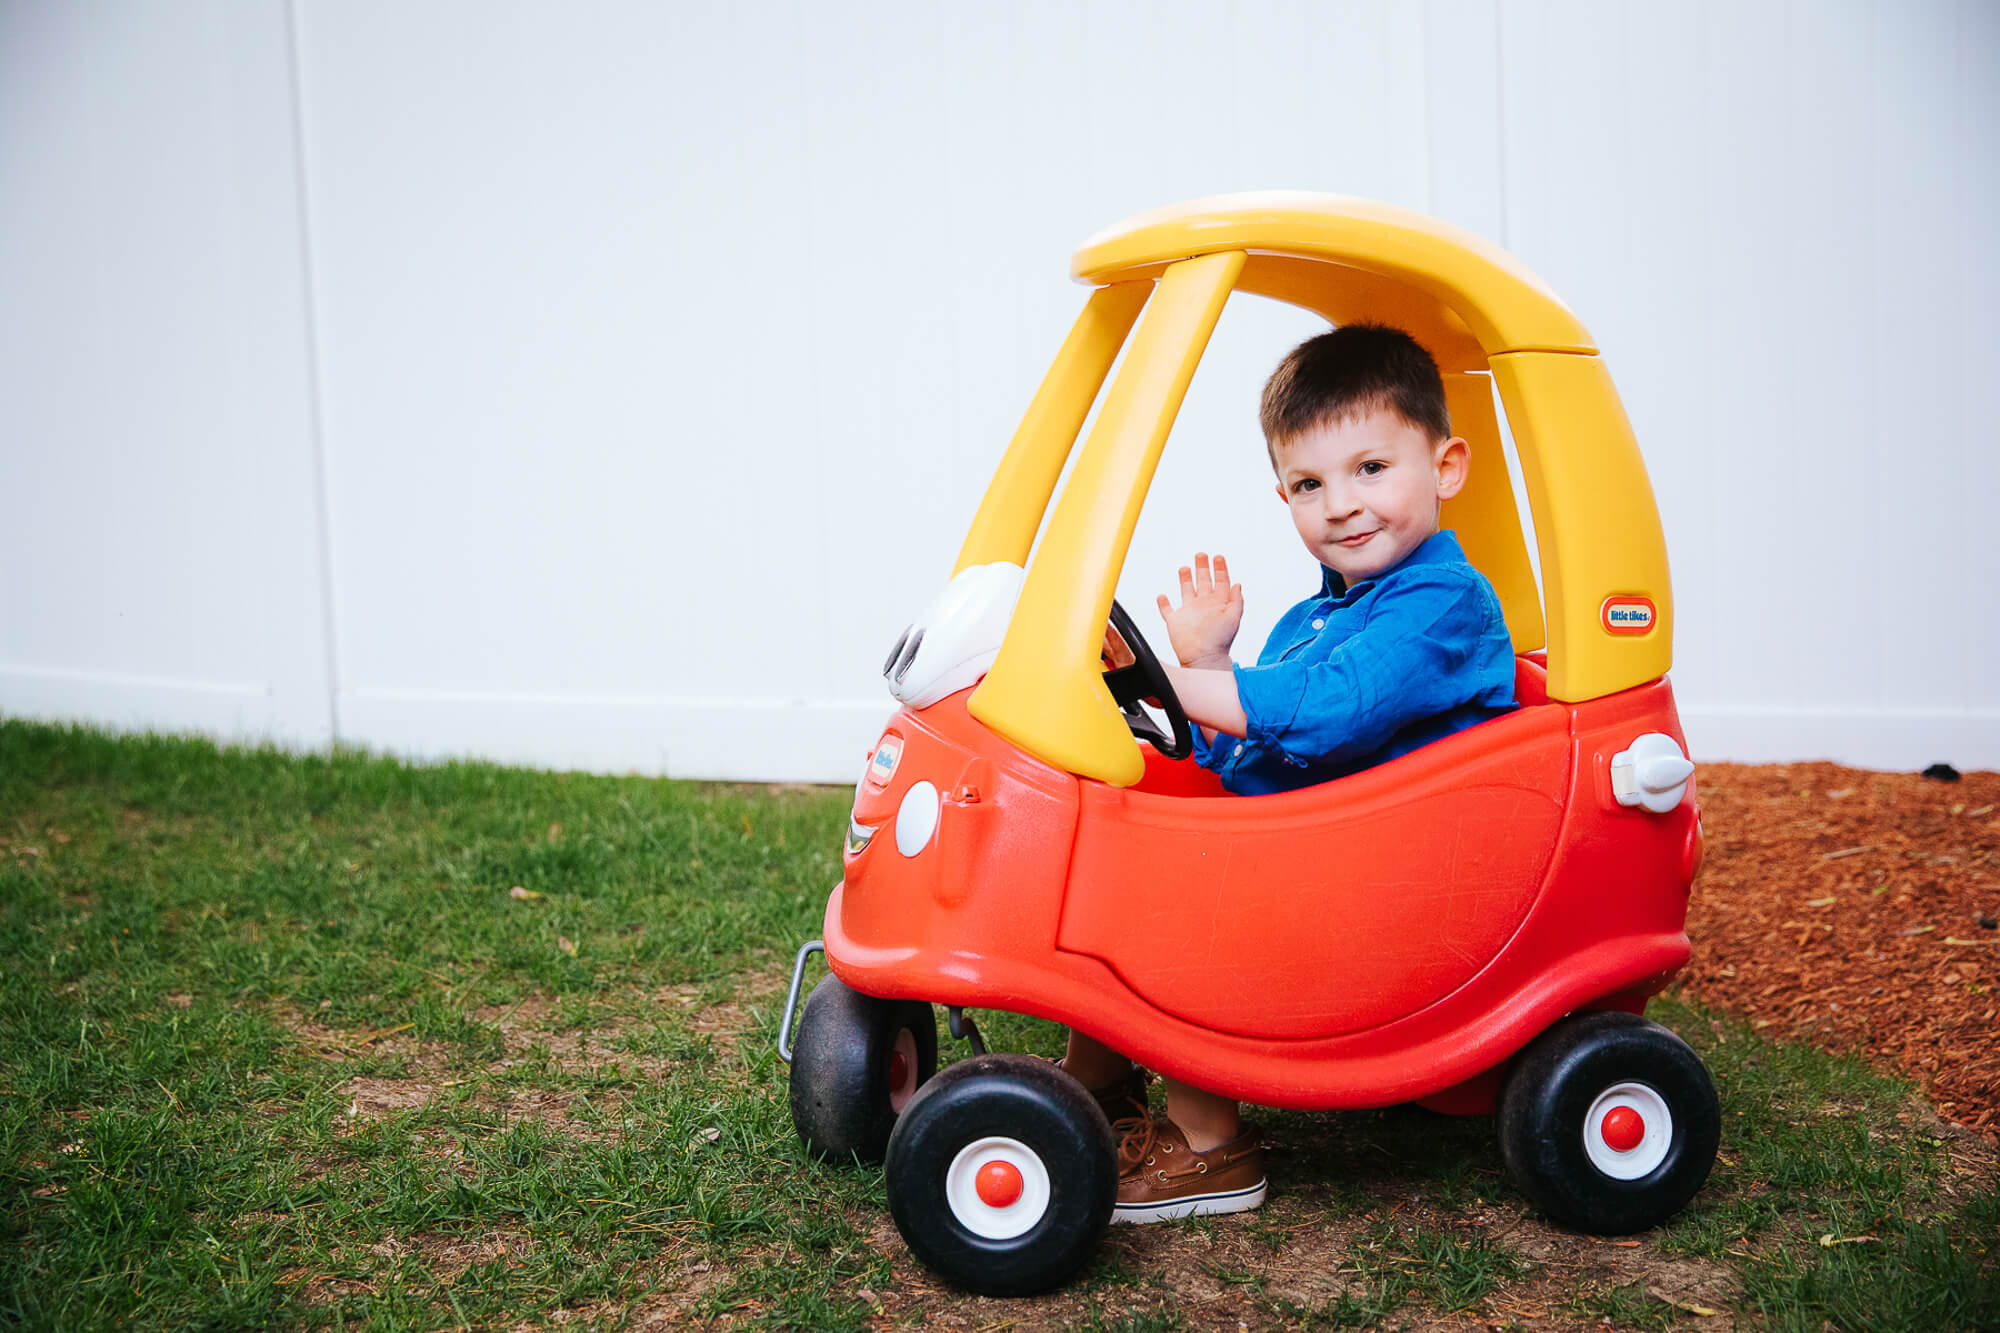 4 year old boy honks horn as he rides through his backyard in a red Fischer Price car